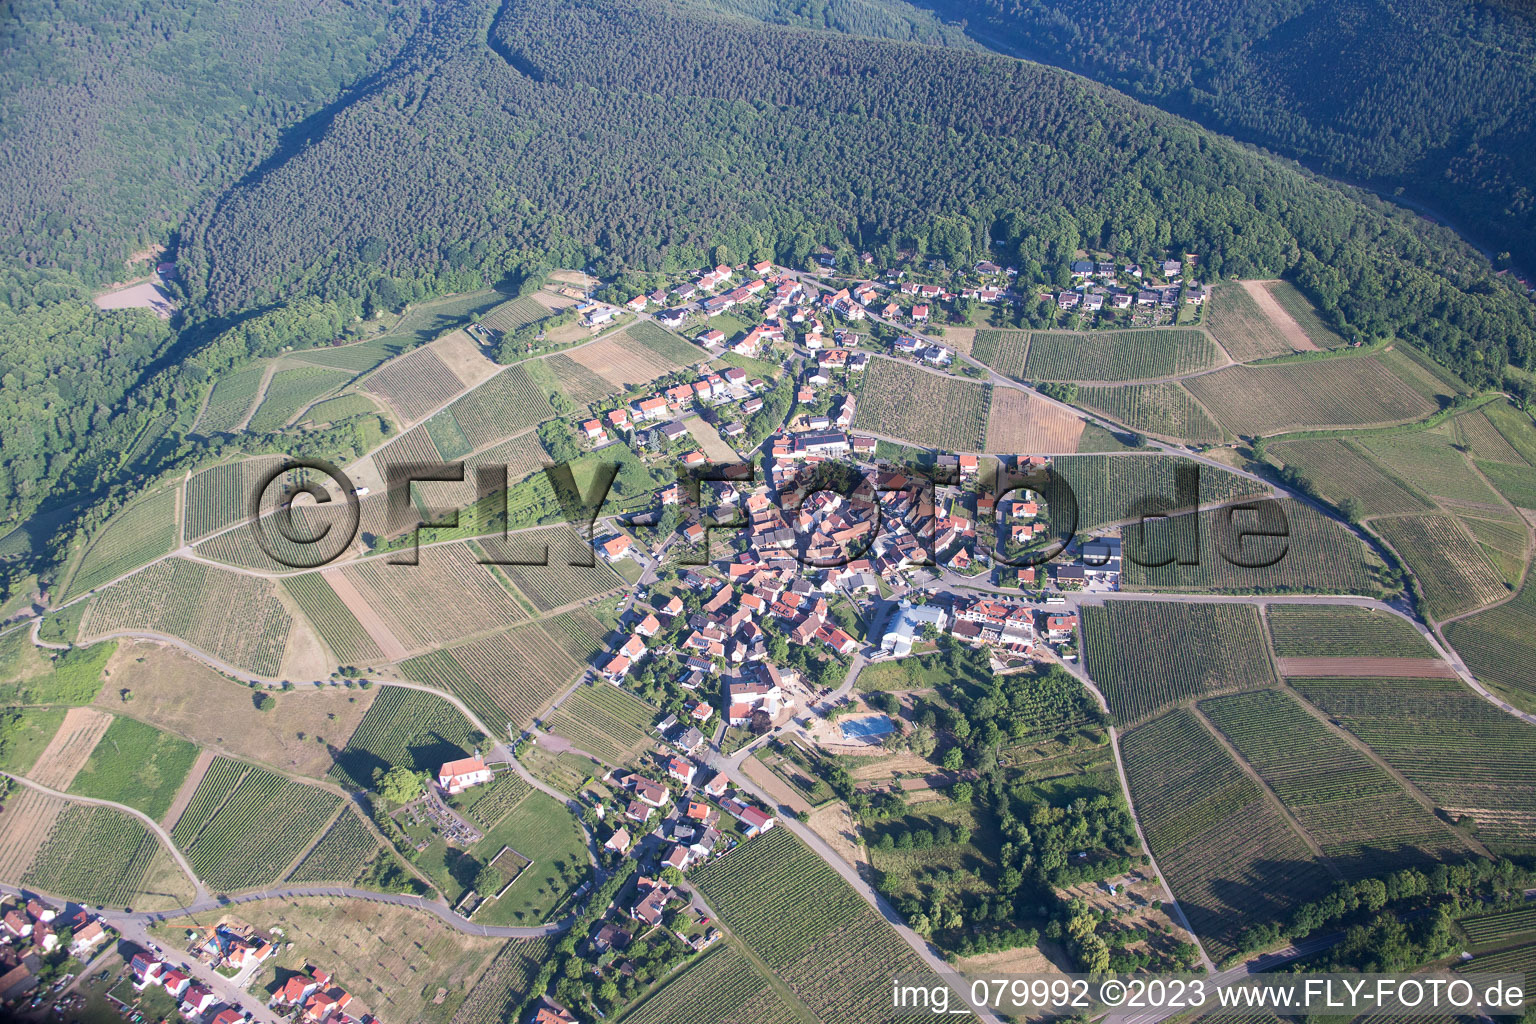 Aerial photograpy of District Gleiszellen in Gleiszellen-Gleishorbach in the state Rhineland-Palatinate, Germany